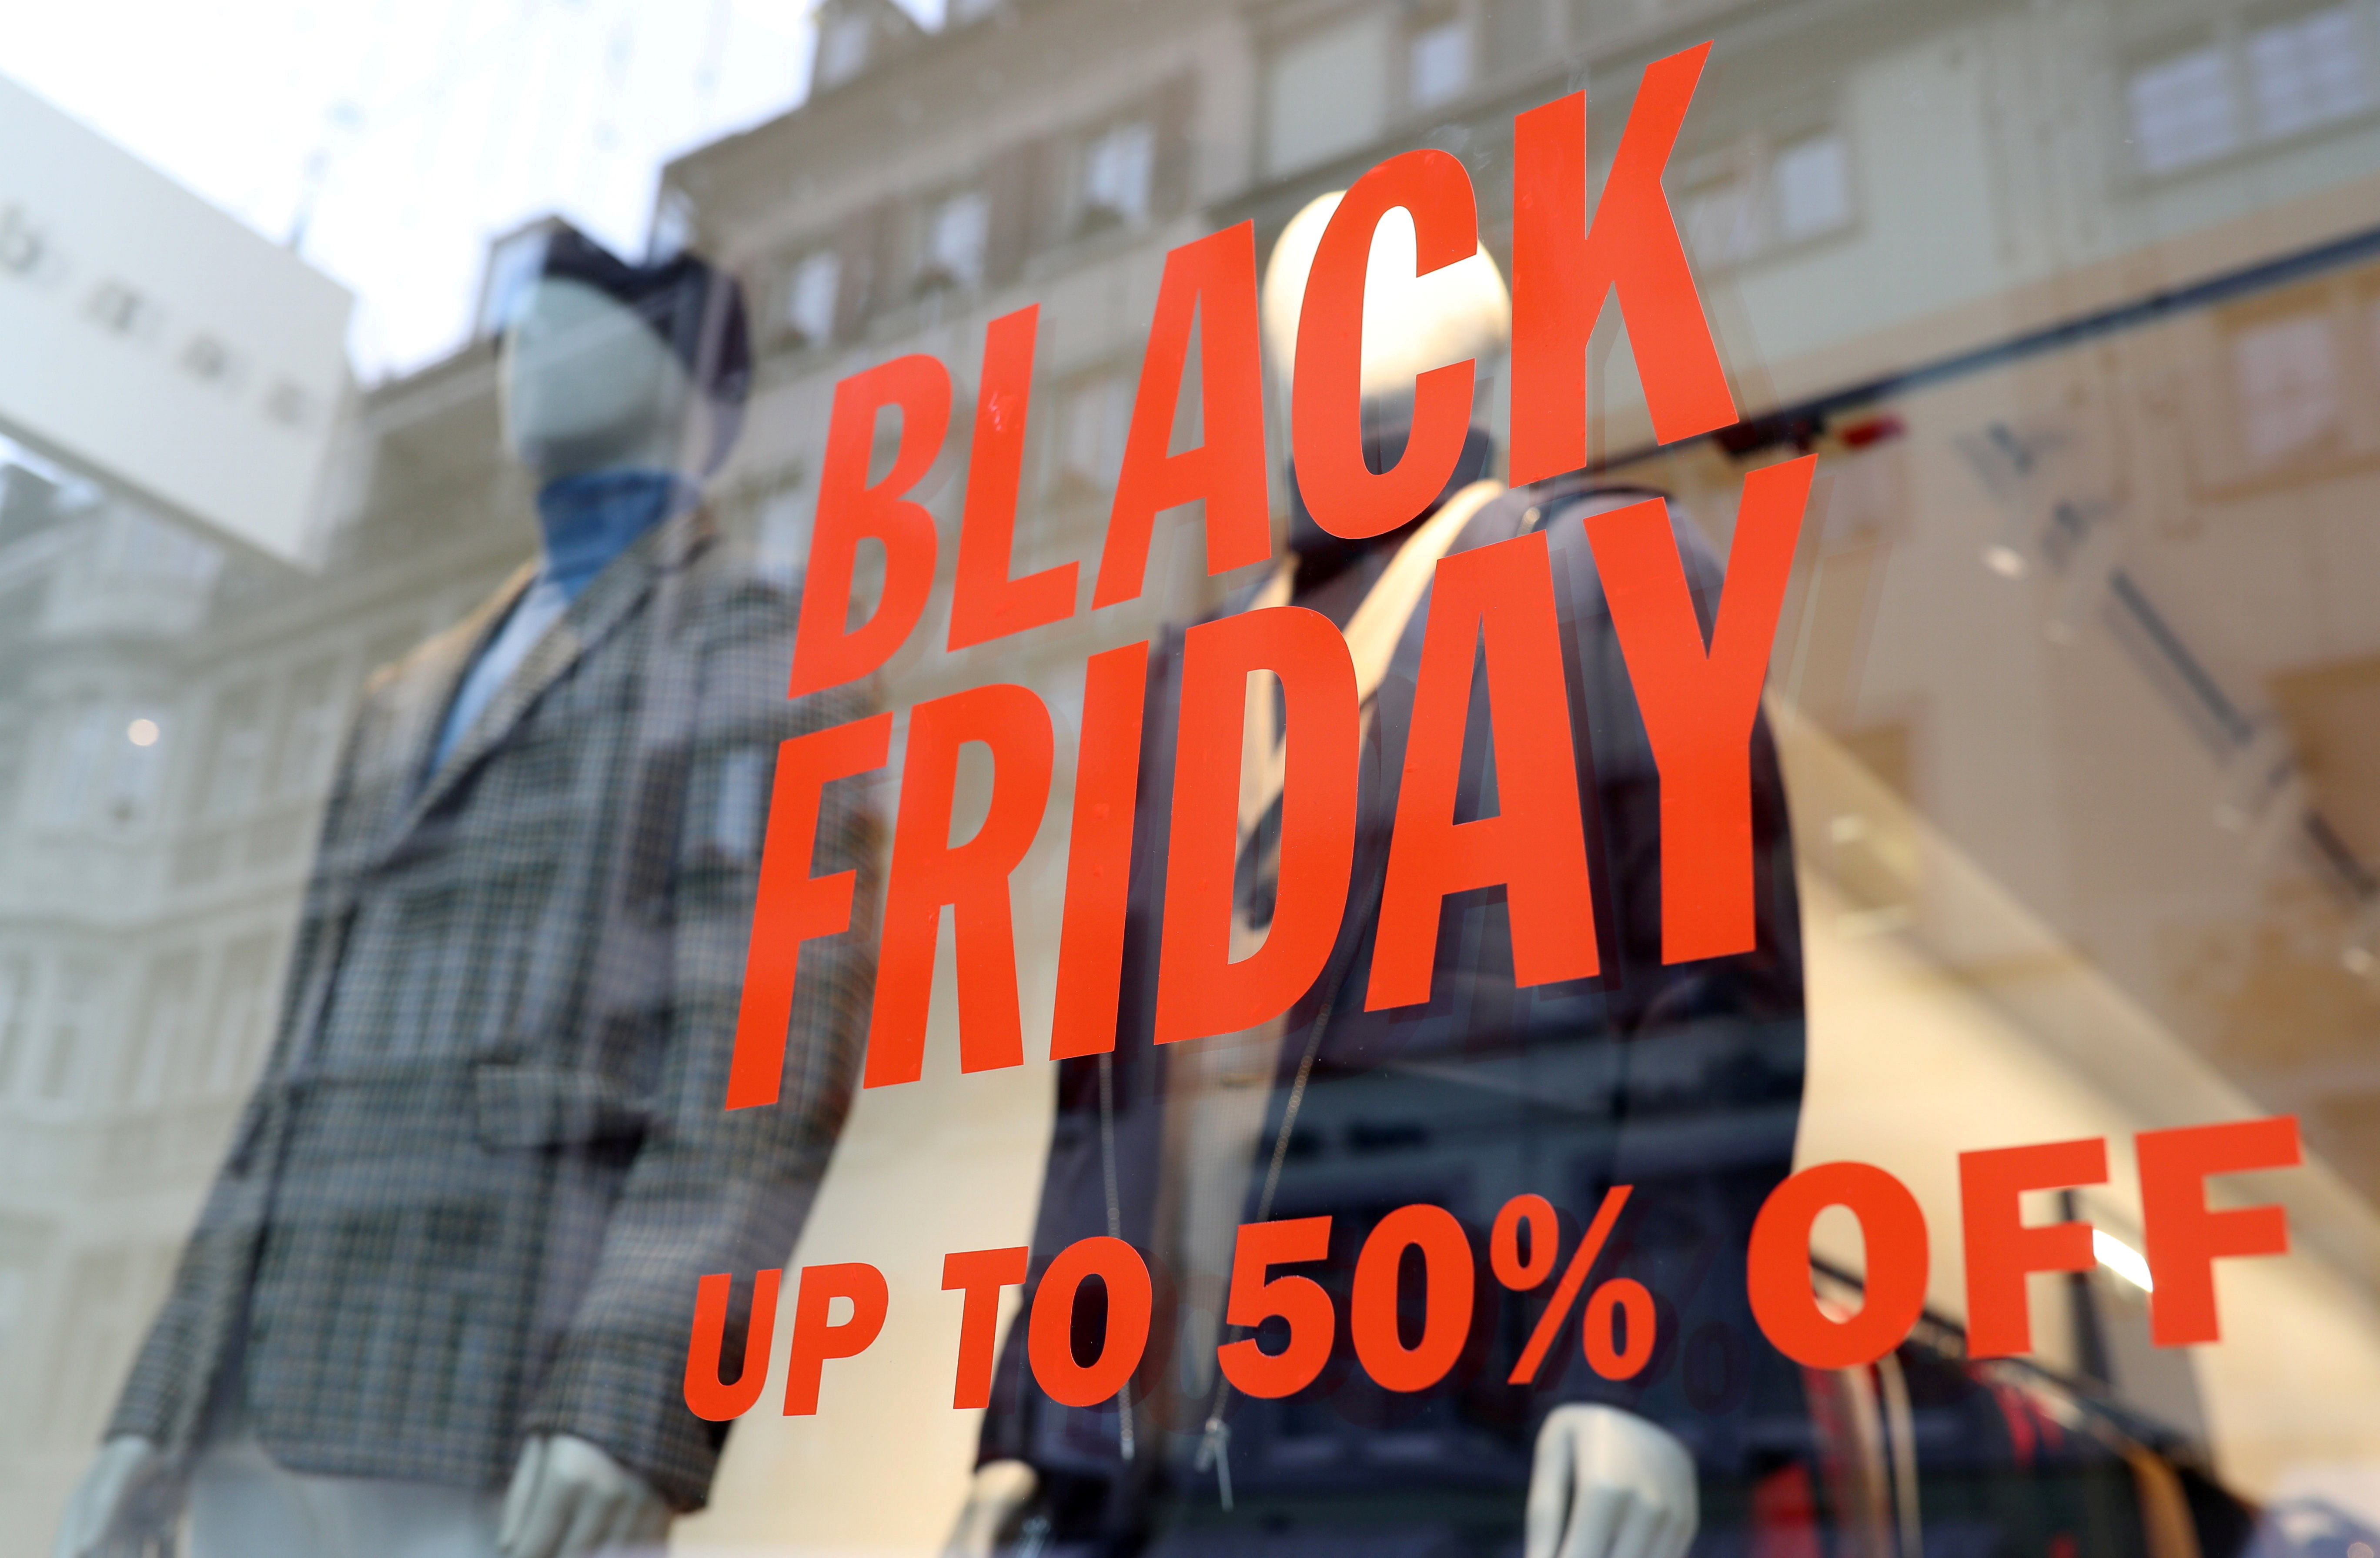 Special discount on Black Friday sales is offered at a fashion store in Zurich